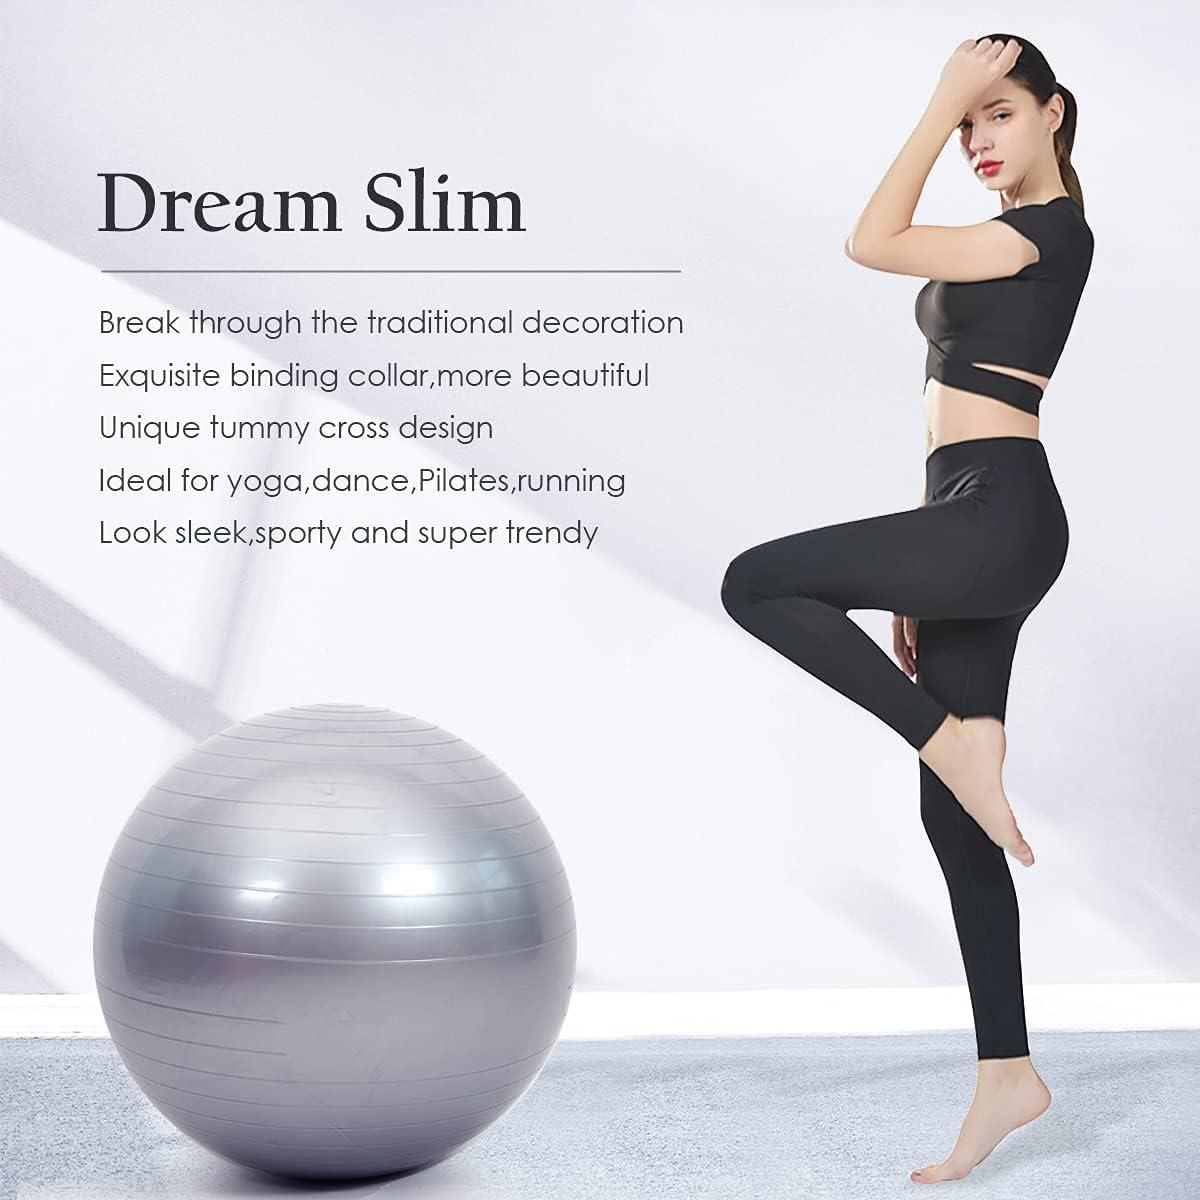 Yoga Sports Short-Sleeved Sexy Women's Quick-Drying Fitness Clothes Running  Casual Slimming Tops Exercise T-Shirts GYM Wear